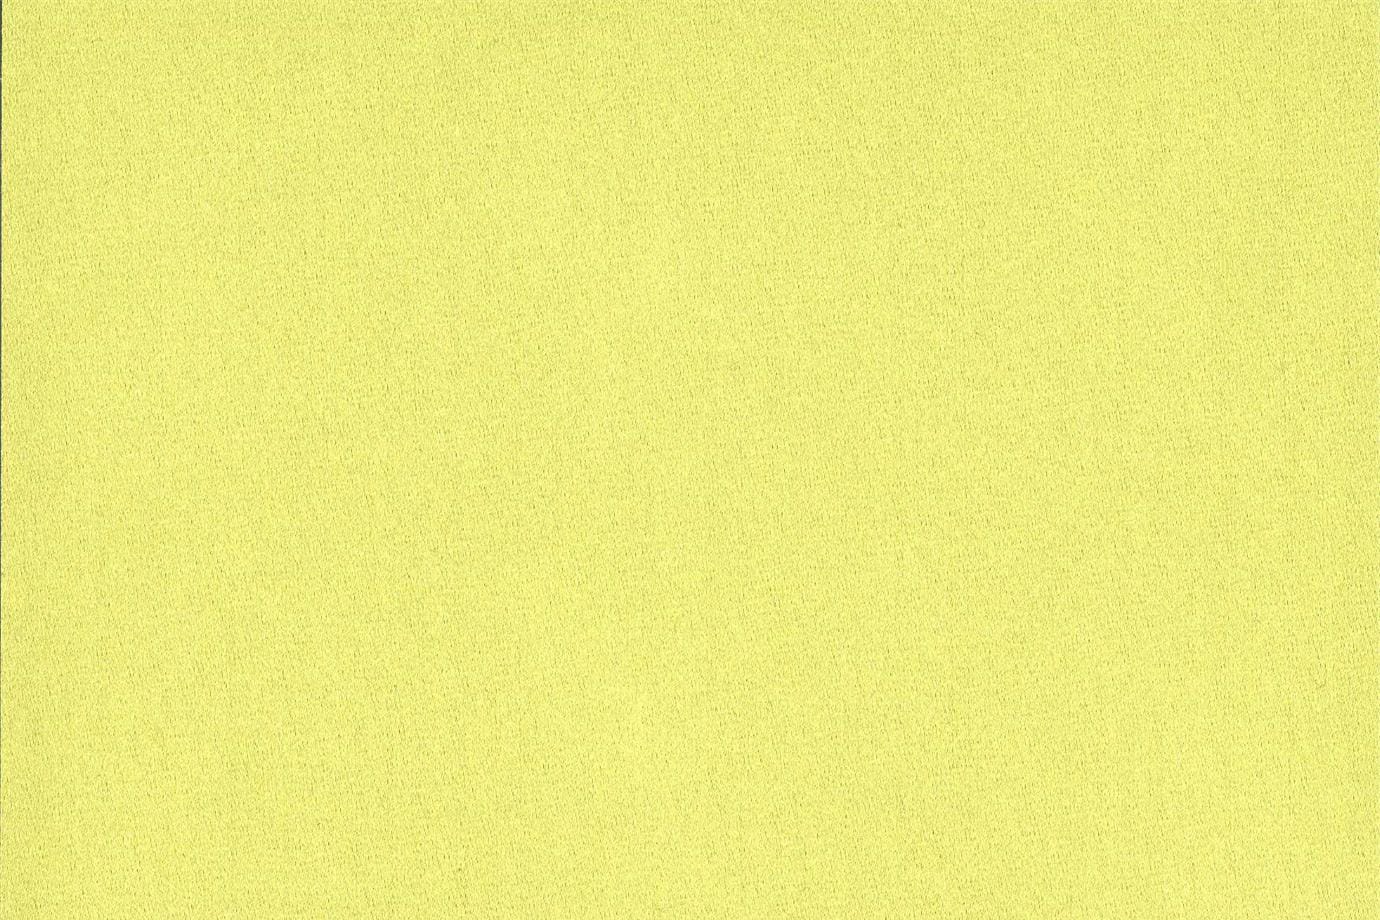 J1594 MEO PATACCA 009 Lime home decoration fabric